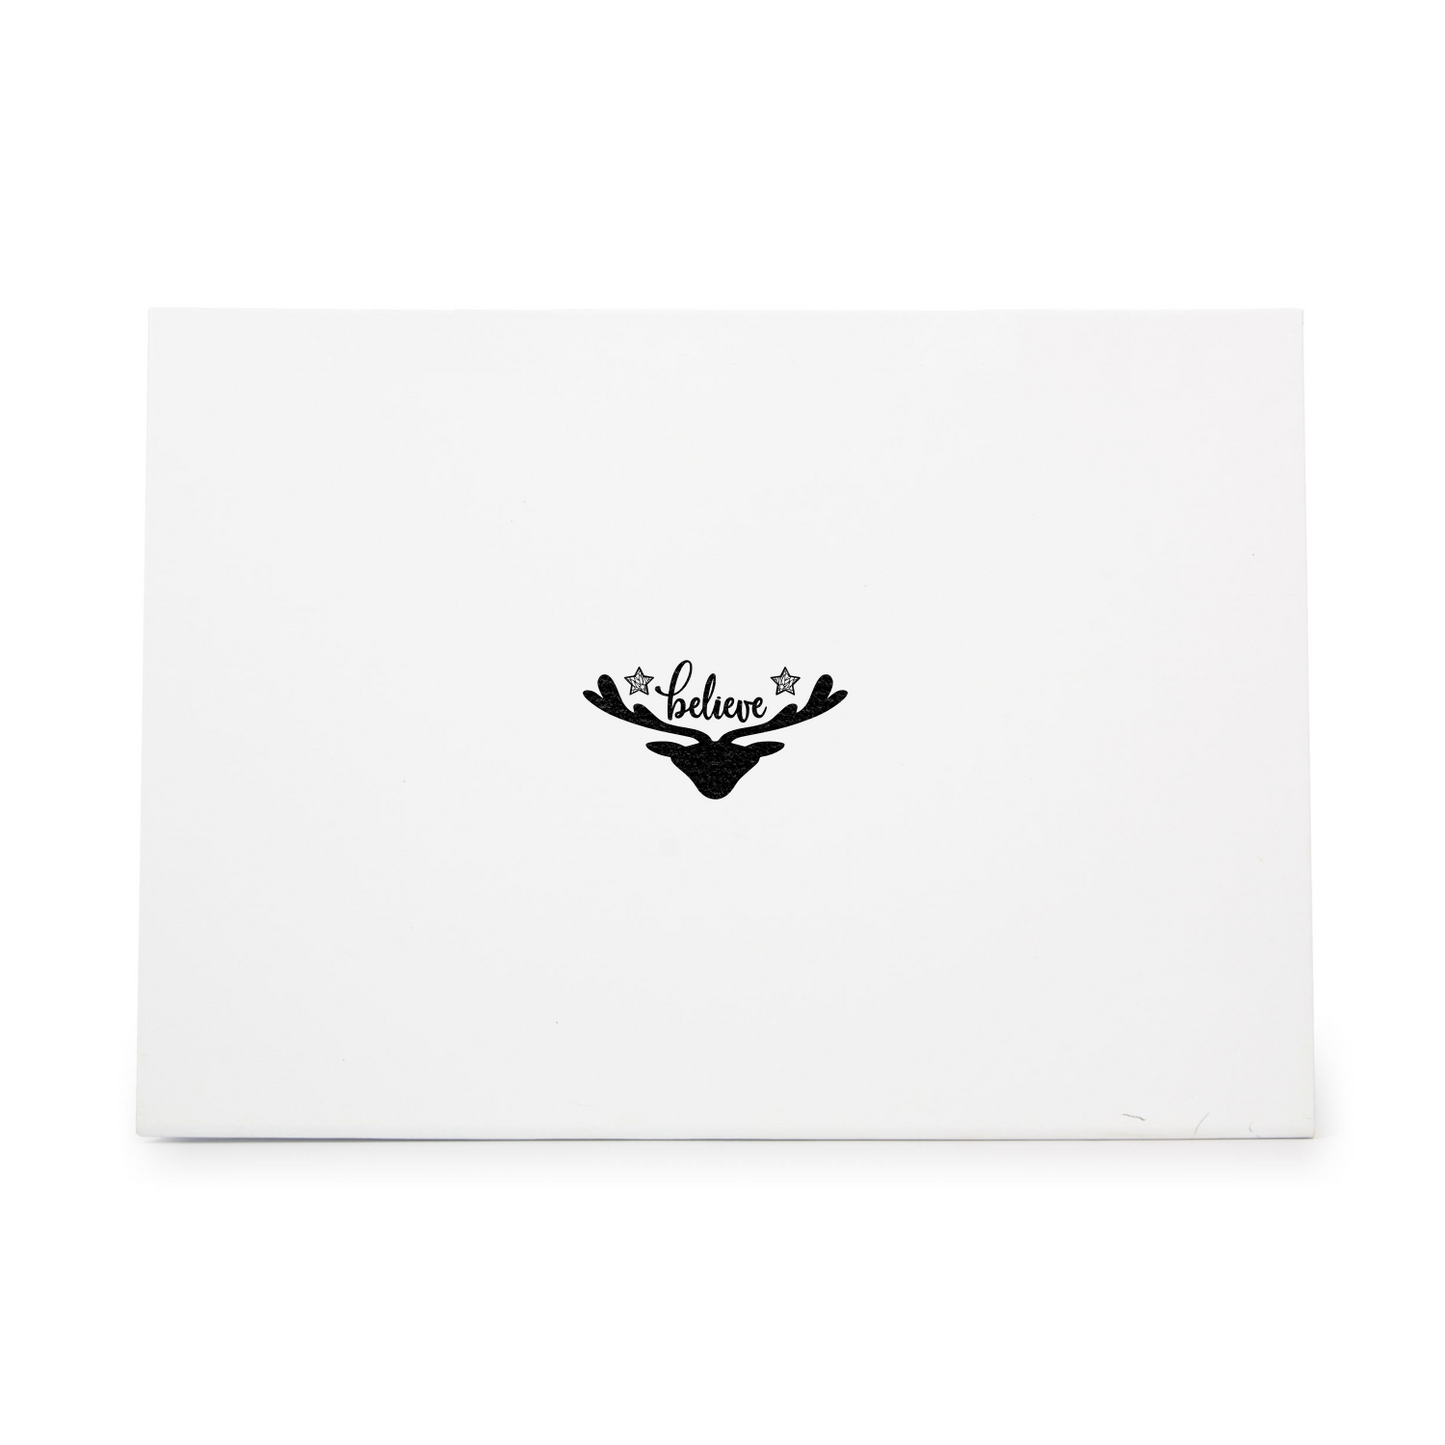 Reindeer With  Believe Above It Rubber Stamp CCSTA-11196